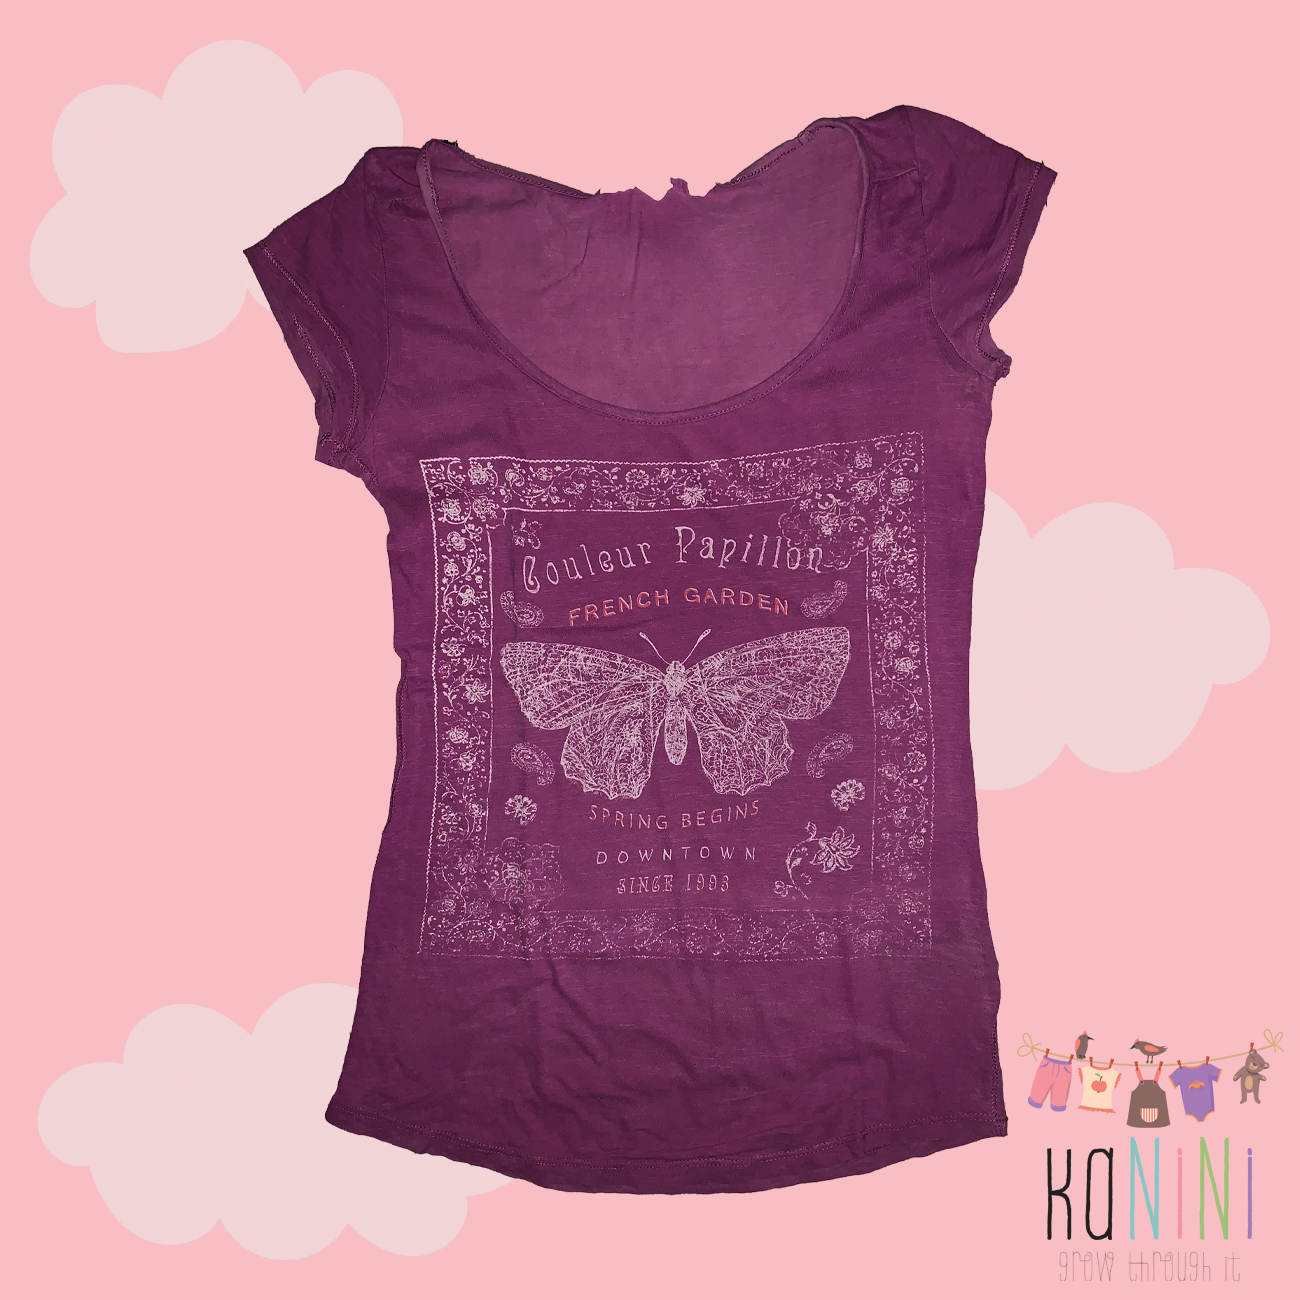 Featured image for “LOGG X-Small Girls Butterfly T-Shirt”